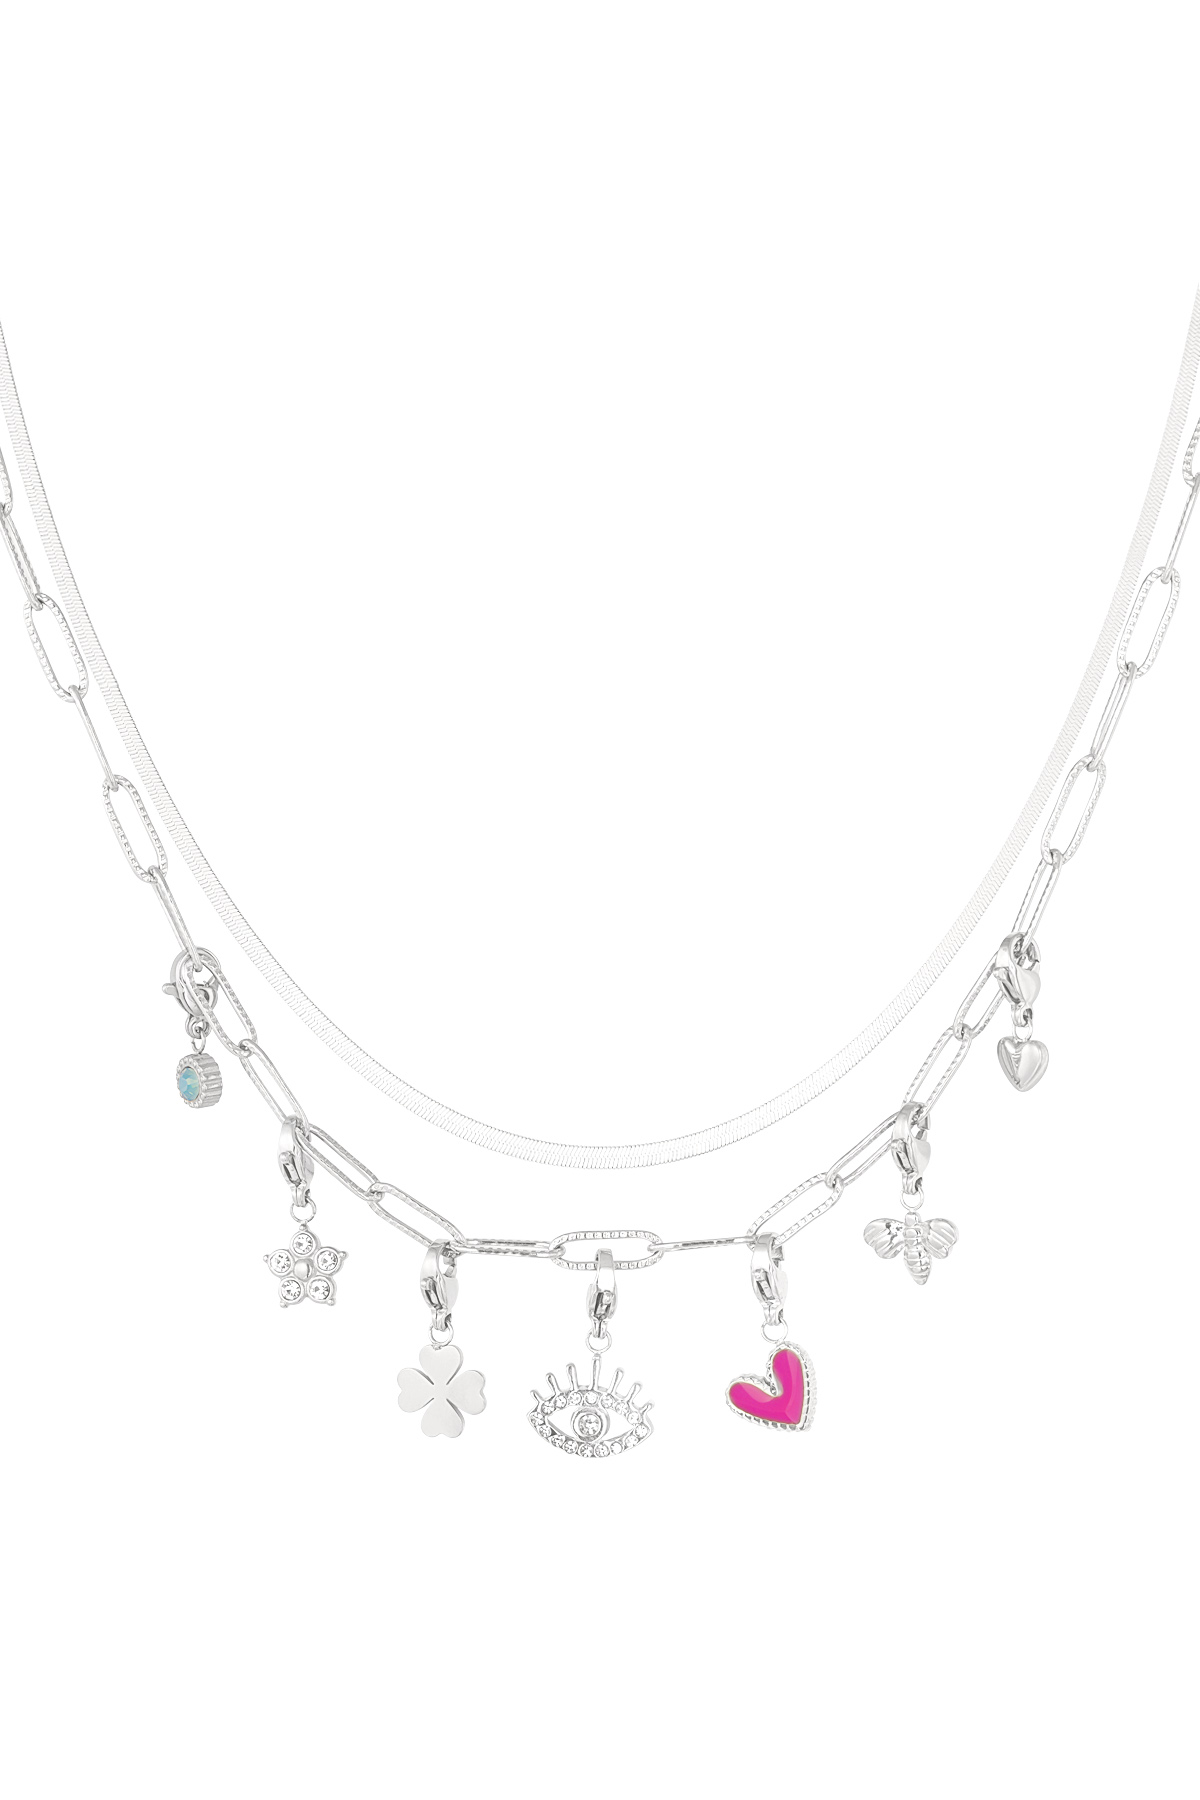 Charm necklace lovey dovey - silver